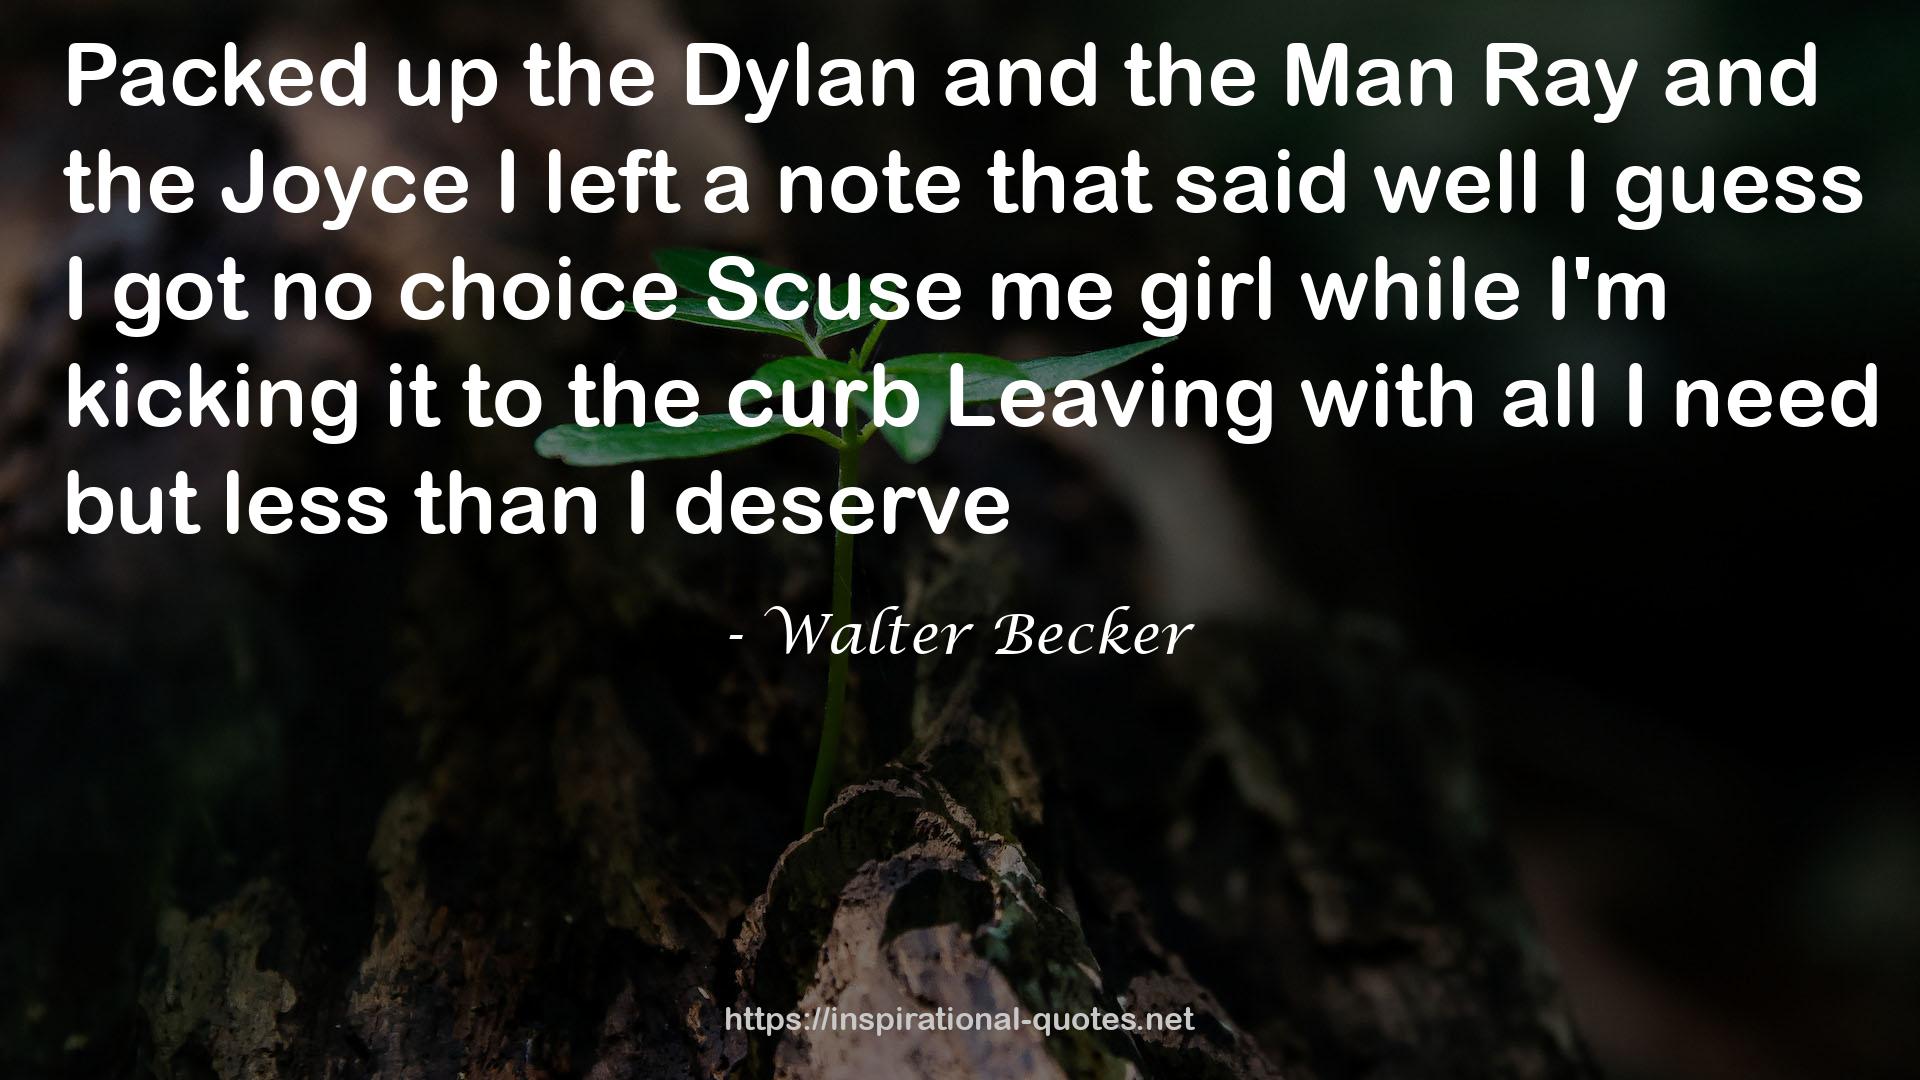 Walter Becker QUOTES